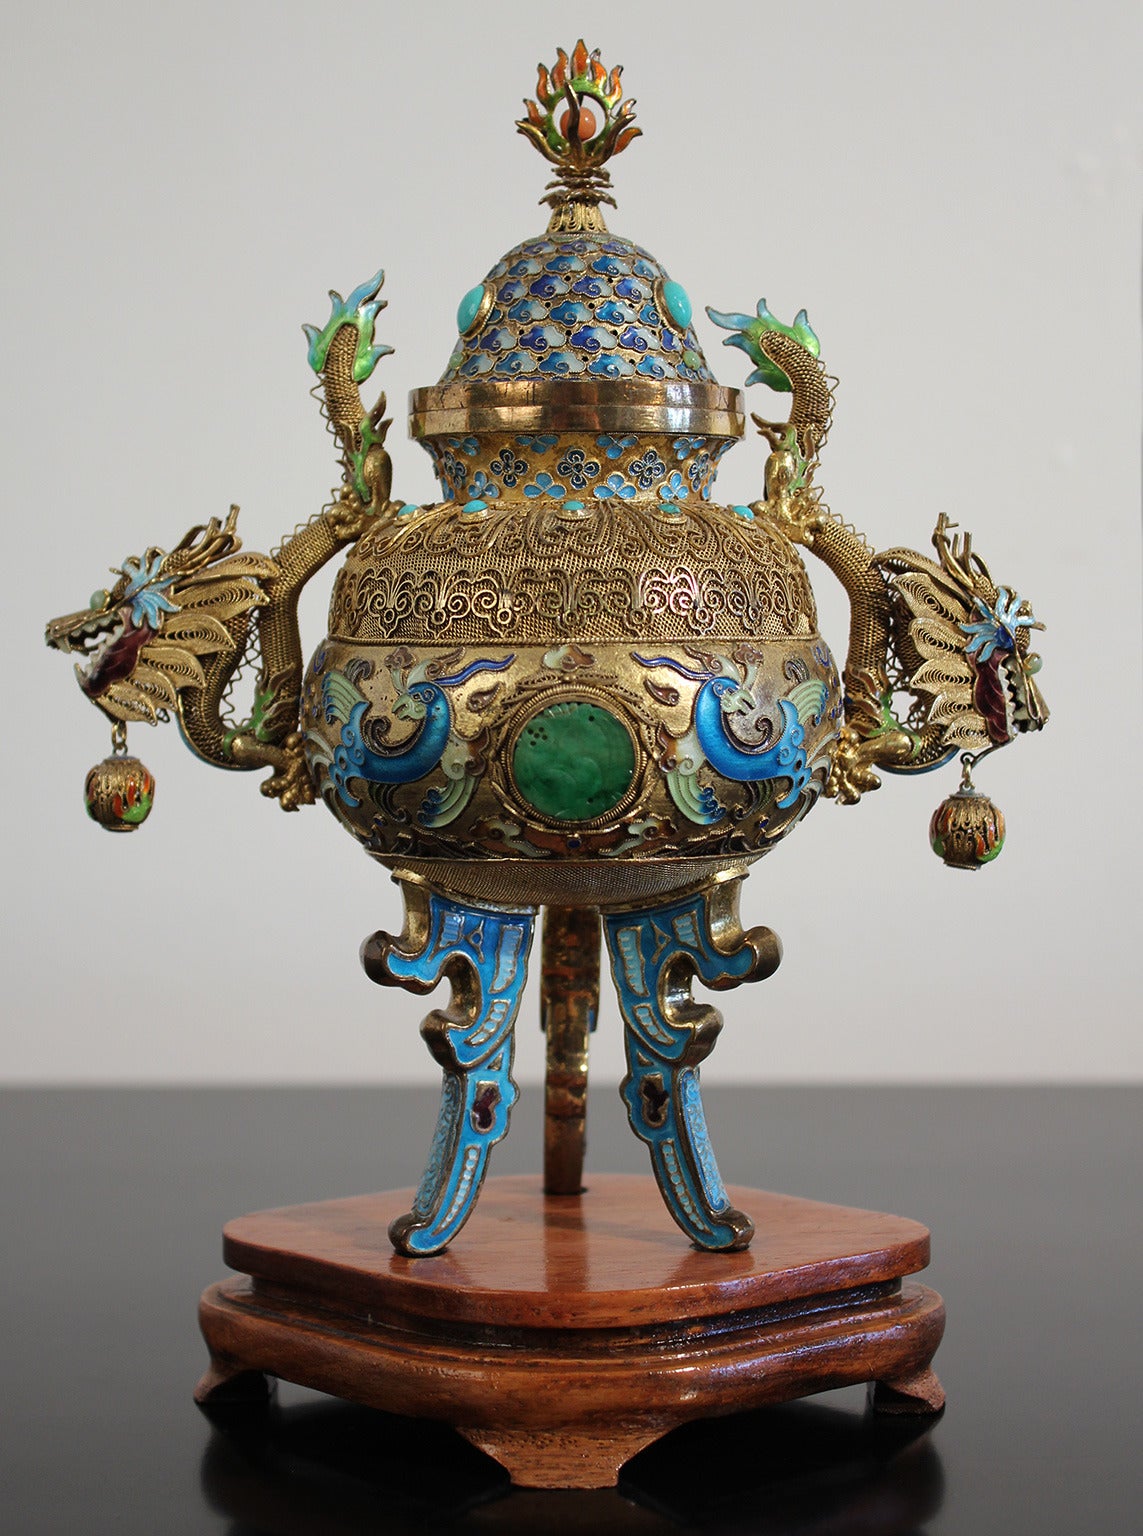 Expertly crafted solid sterling silver gold vermeil dragon censer. Handcrafted enamel work, carved jade panels on each side with turquoise and coral decoration. Comes with original footed wood stand.

Excellent condition with no damage, circa